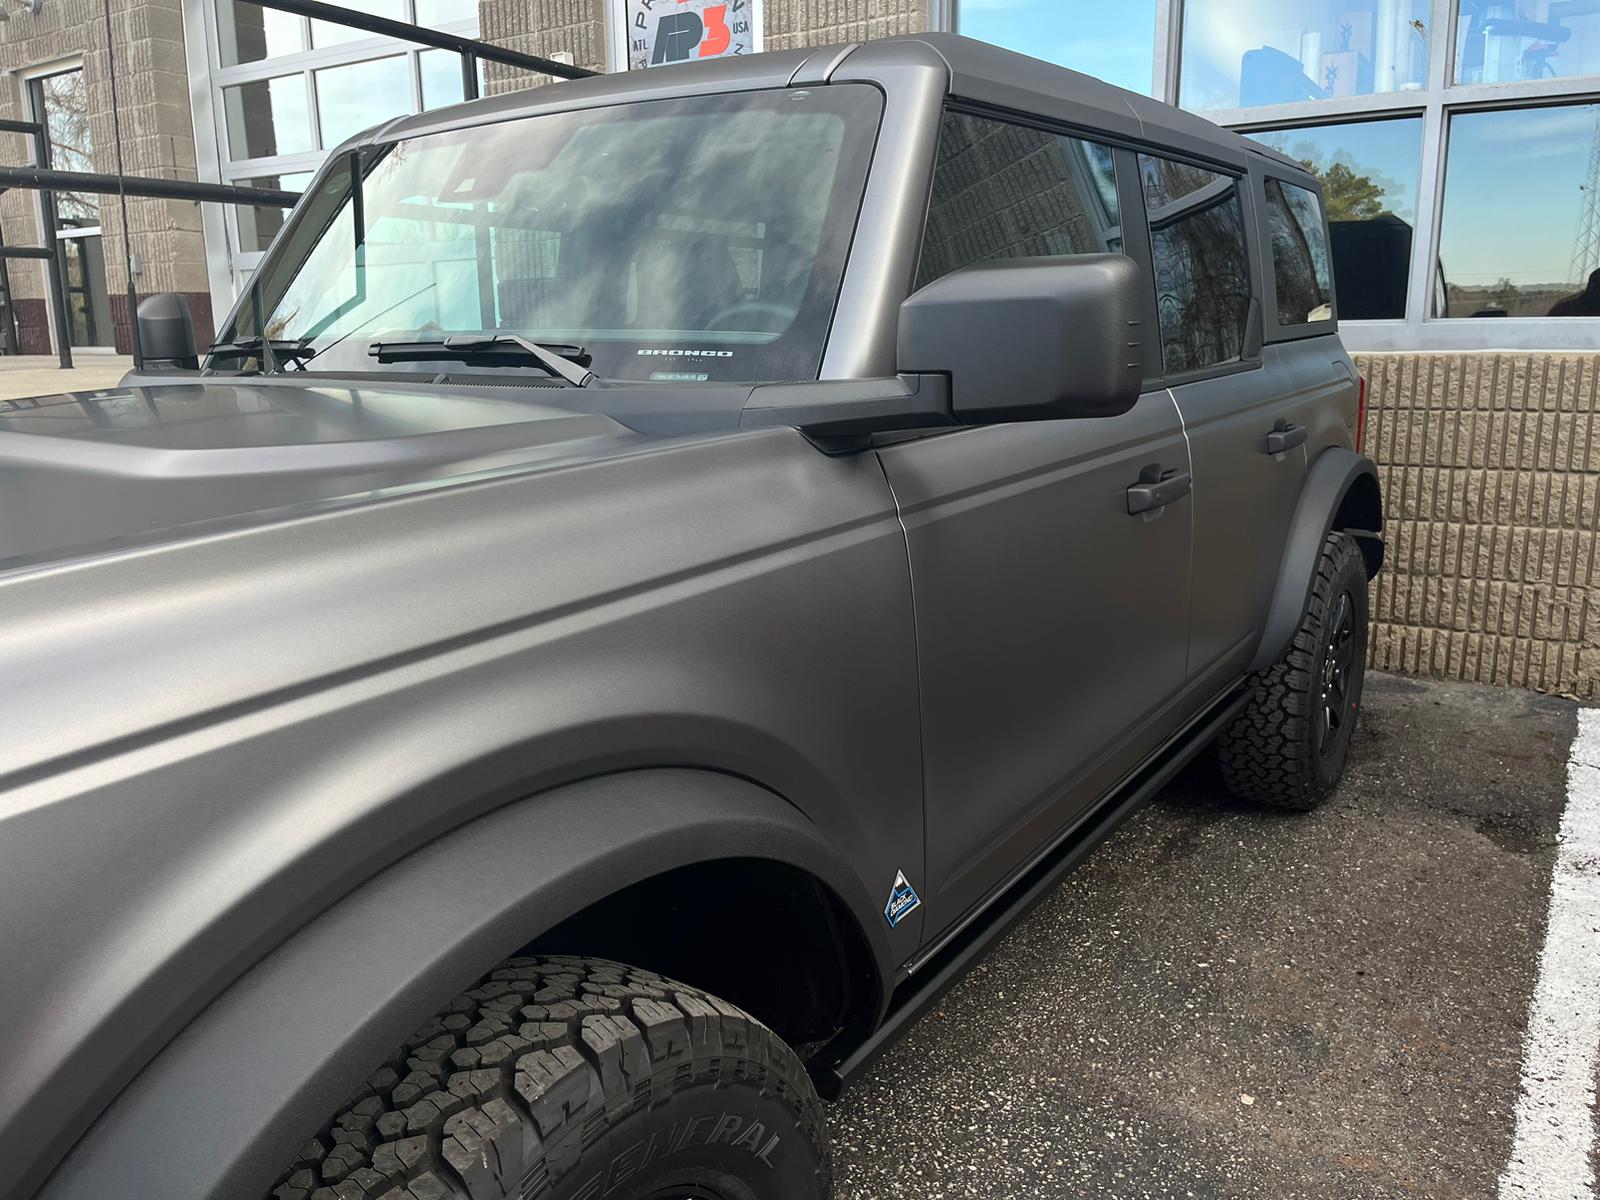 Ford Bronco XPEL Ceramic Coating + XPEL  Ultimate Plus PPF Applied IMG-20240215-WA0010